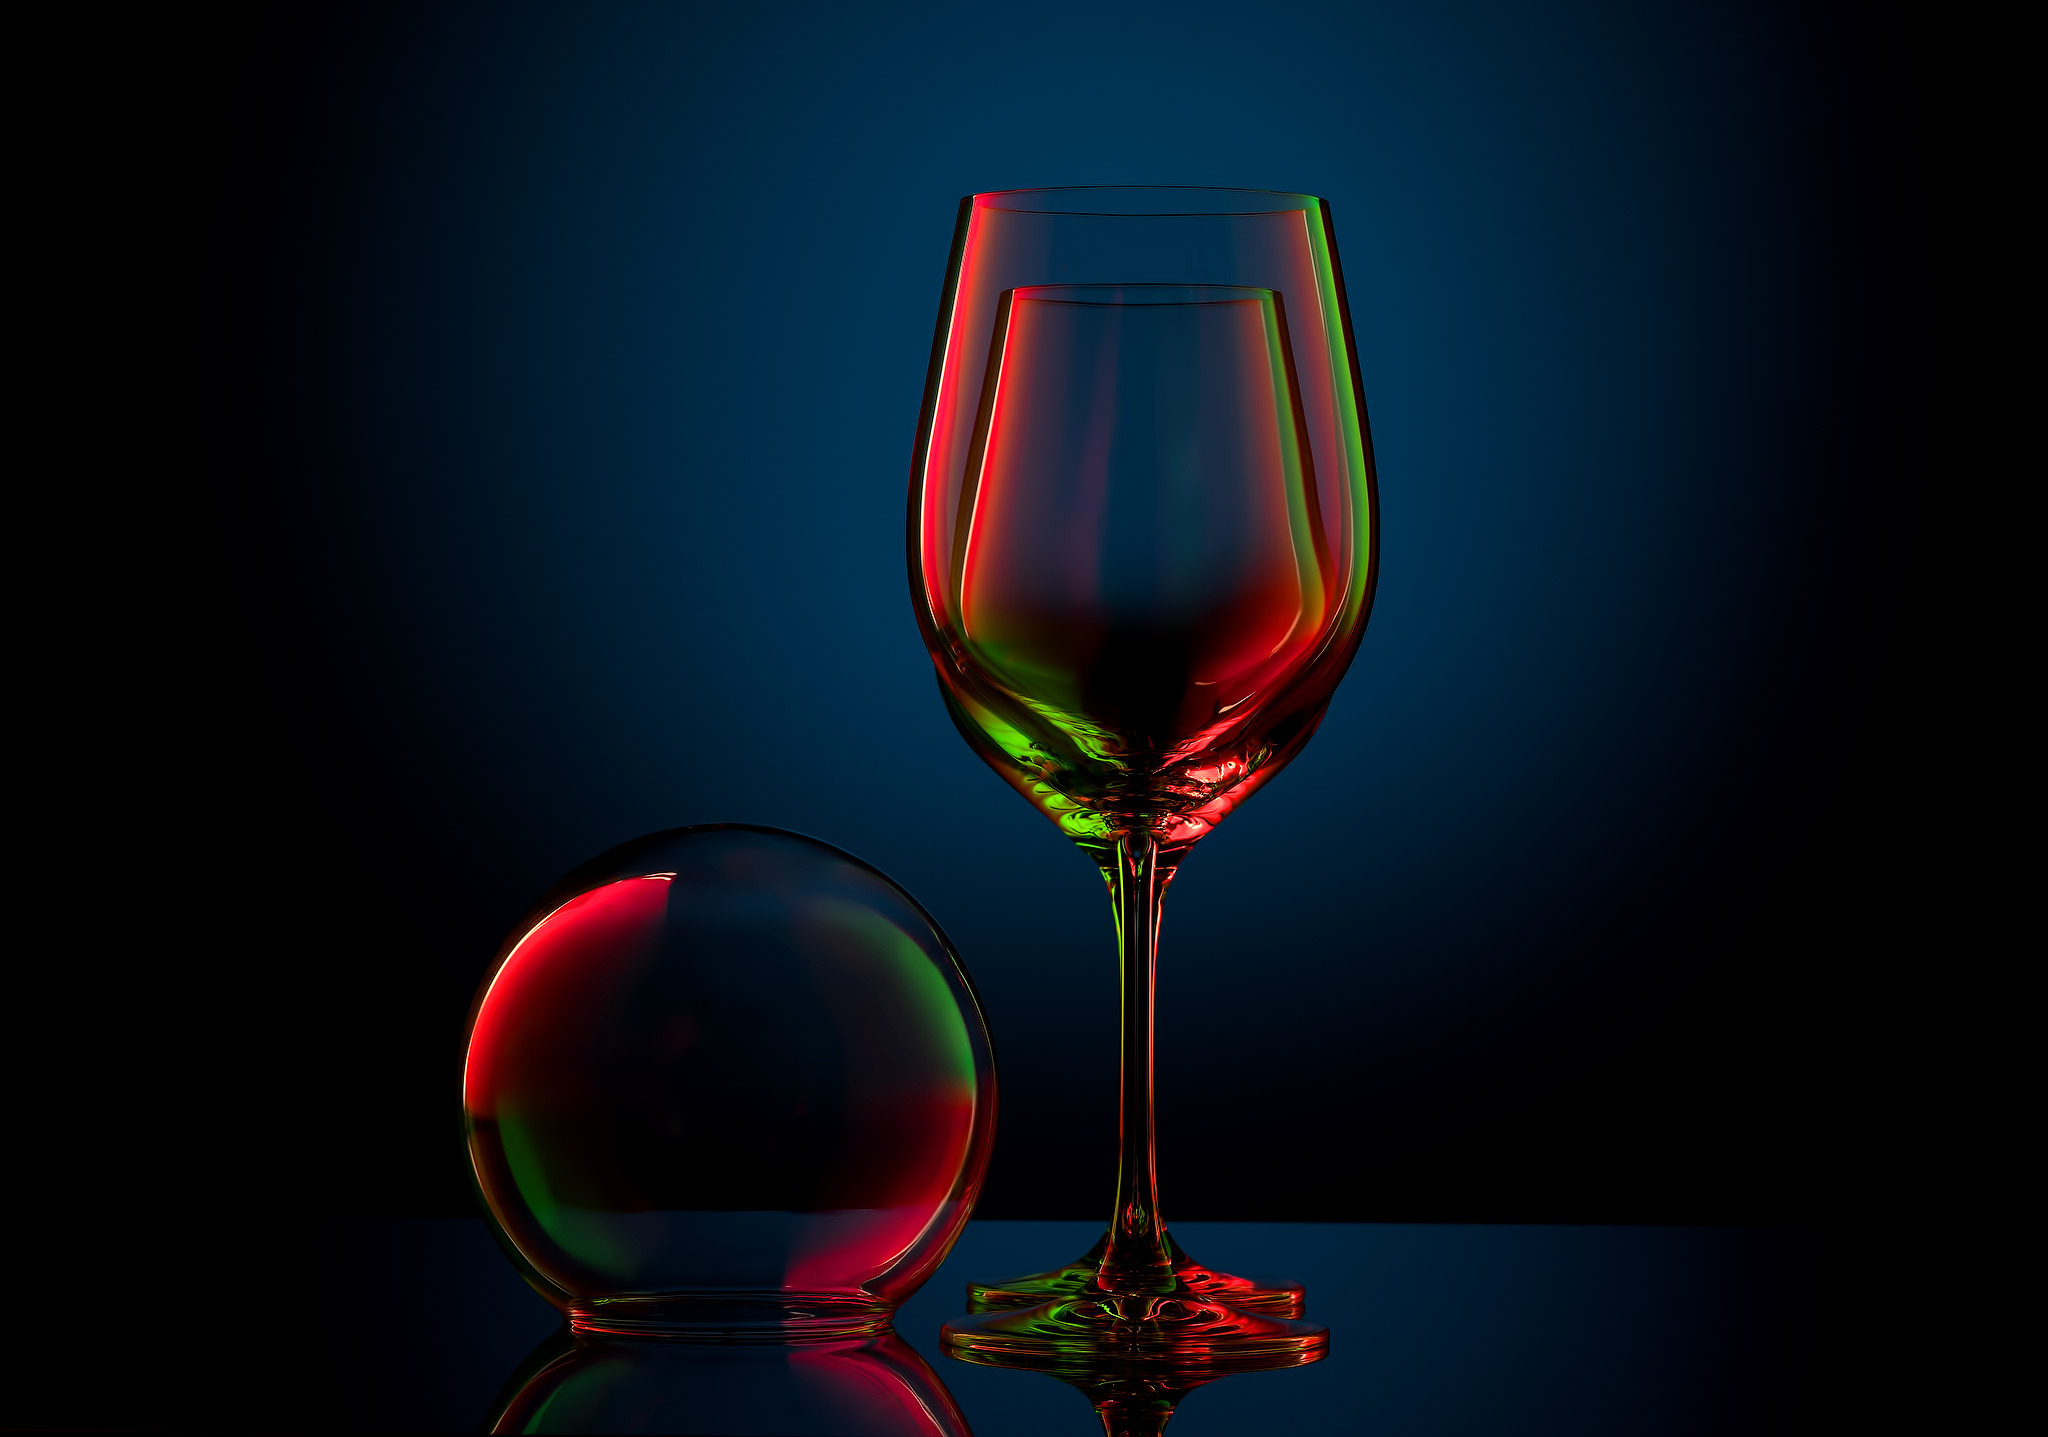 Colorful glass photography assignment tutorial